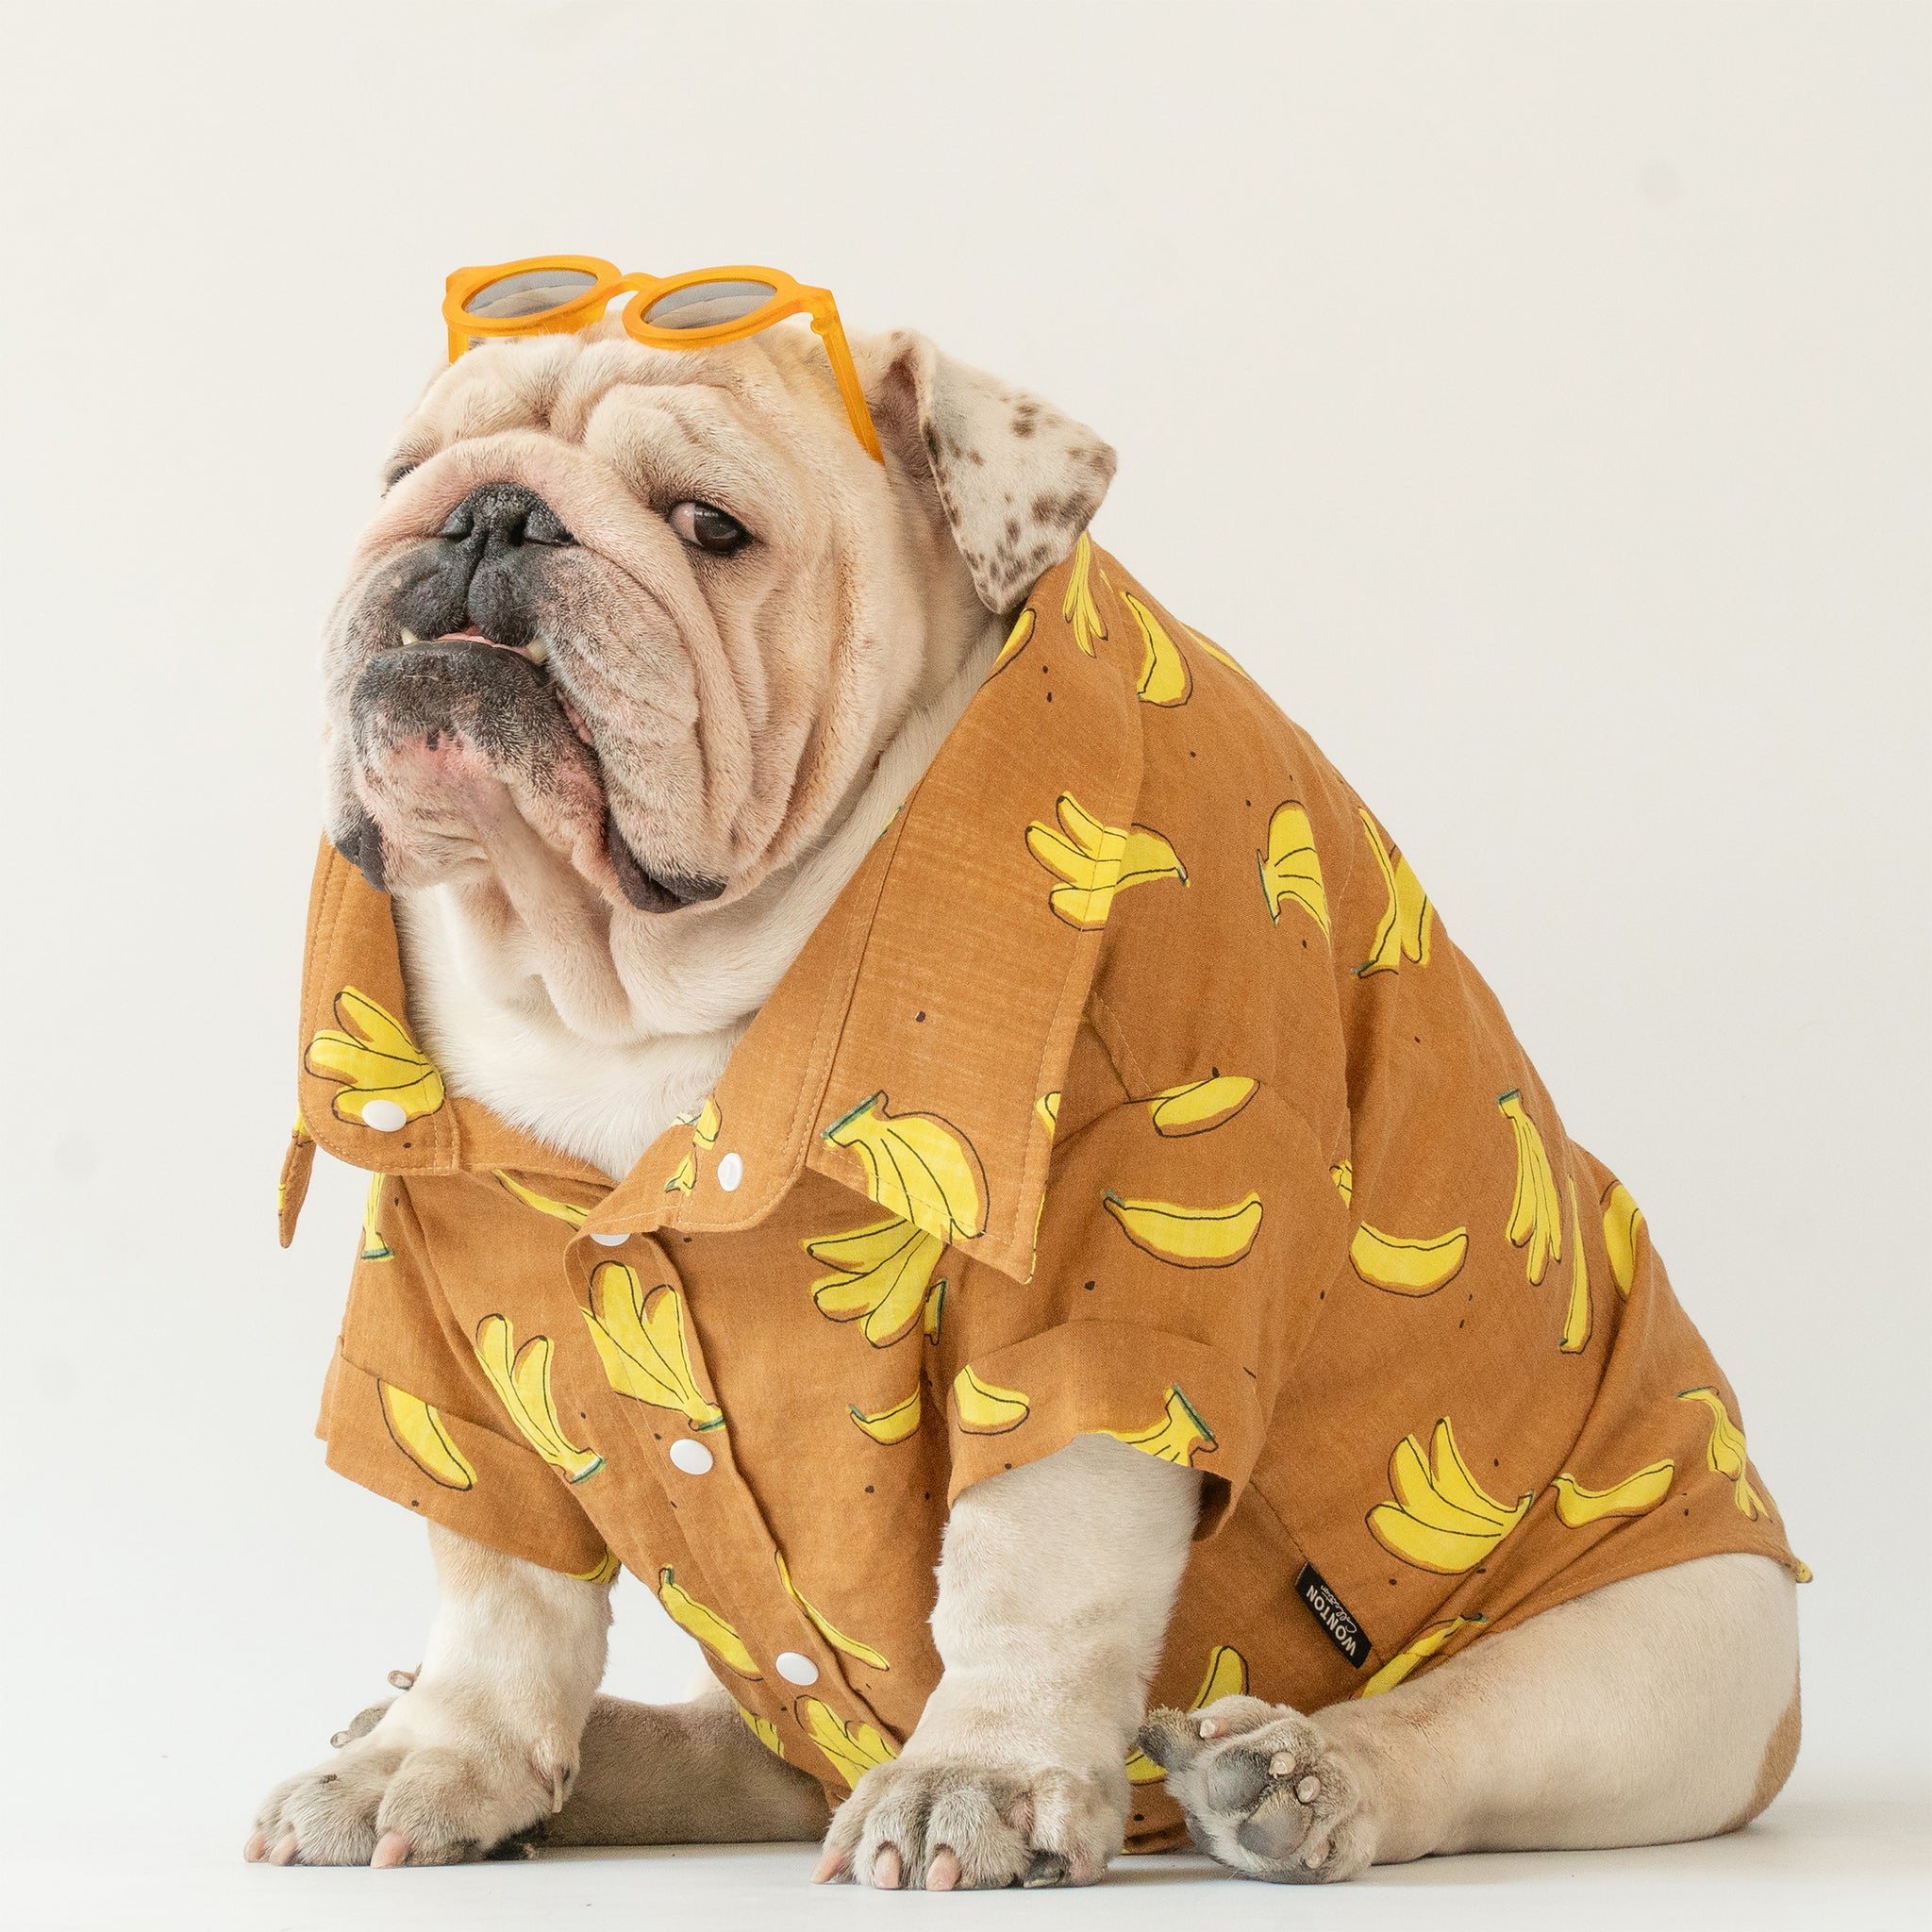 The image depicts a bulldog sitting down, dressed in a brown shirt with a banana print. The dog is also wearing round orange-tinted sunglasses perched on its head. The background is plain and light-colored, which highlights the subject. The dog's posture is relaxed, and it is looking slightly to the side with a calm, almost indifferent expression.